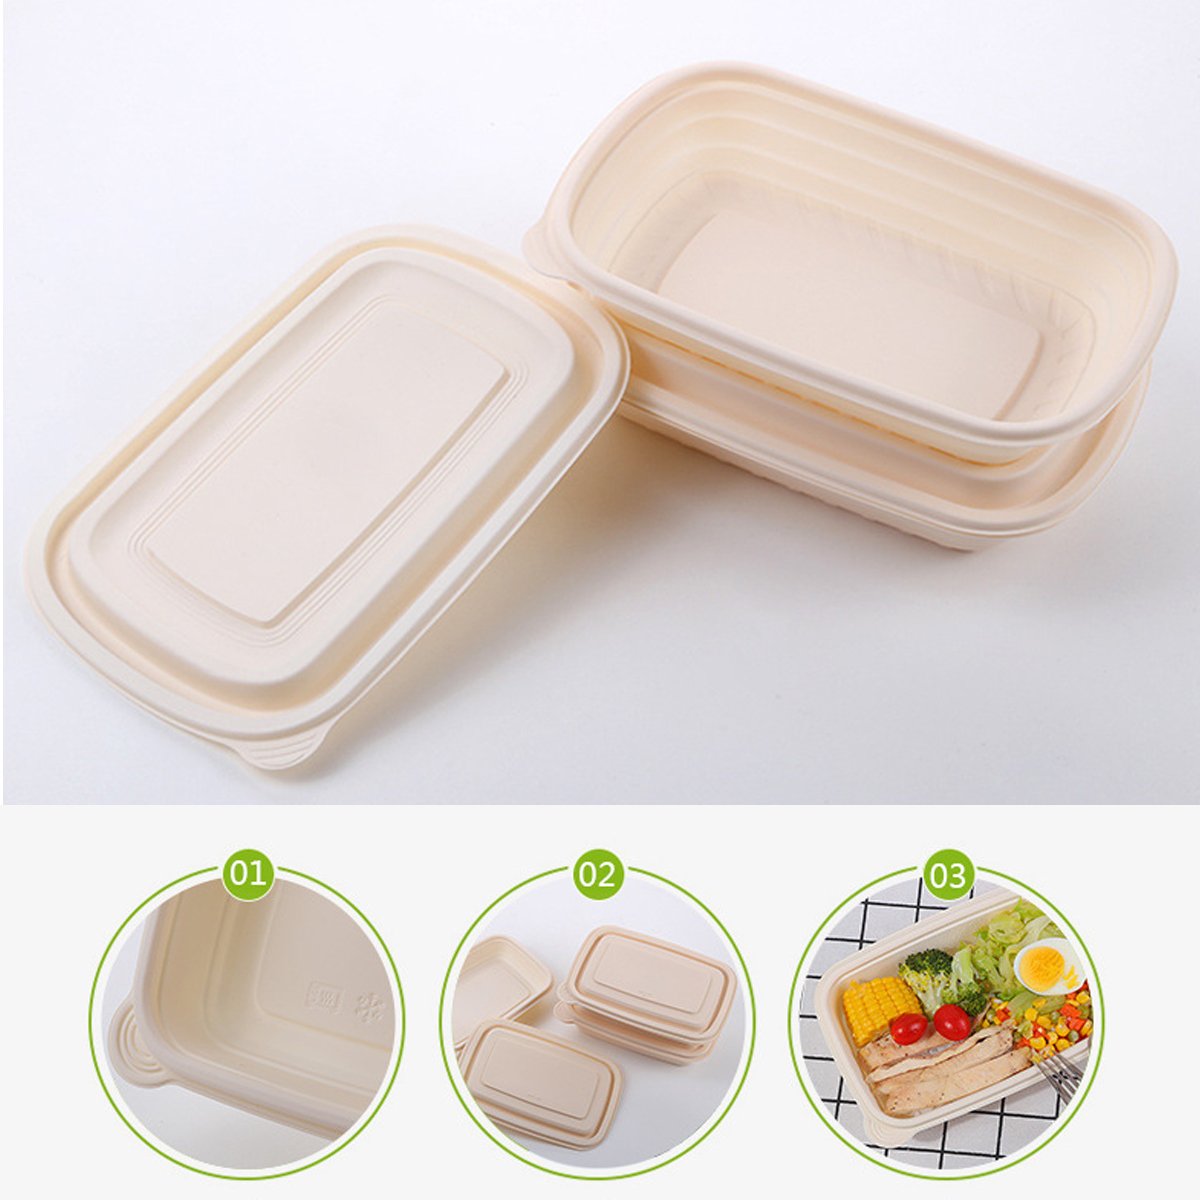 Eco-Friendly Corn Starch Lunch Boxes for Sustainable Meal Packaging